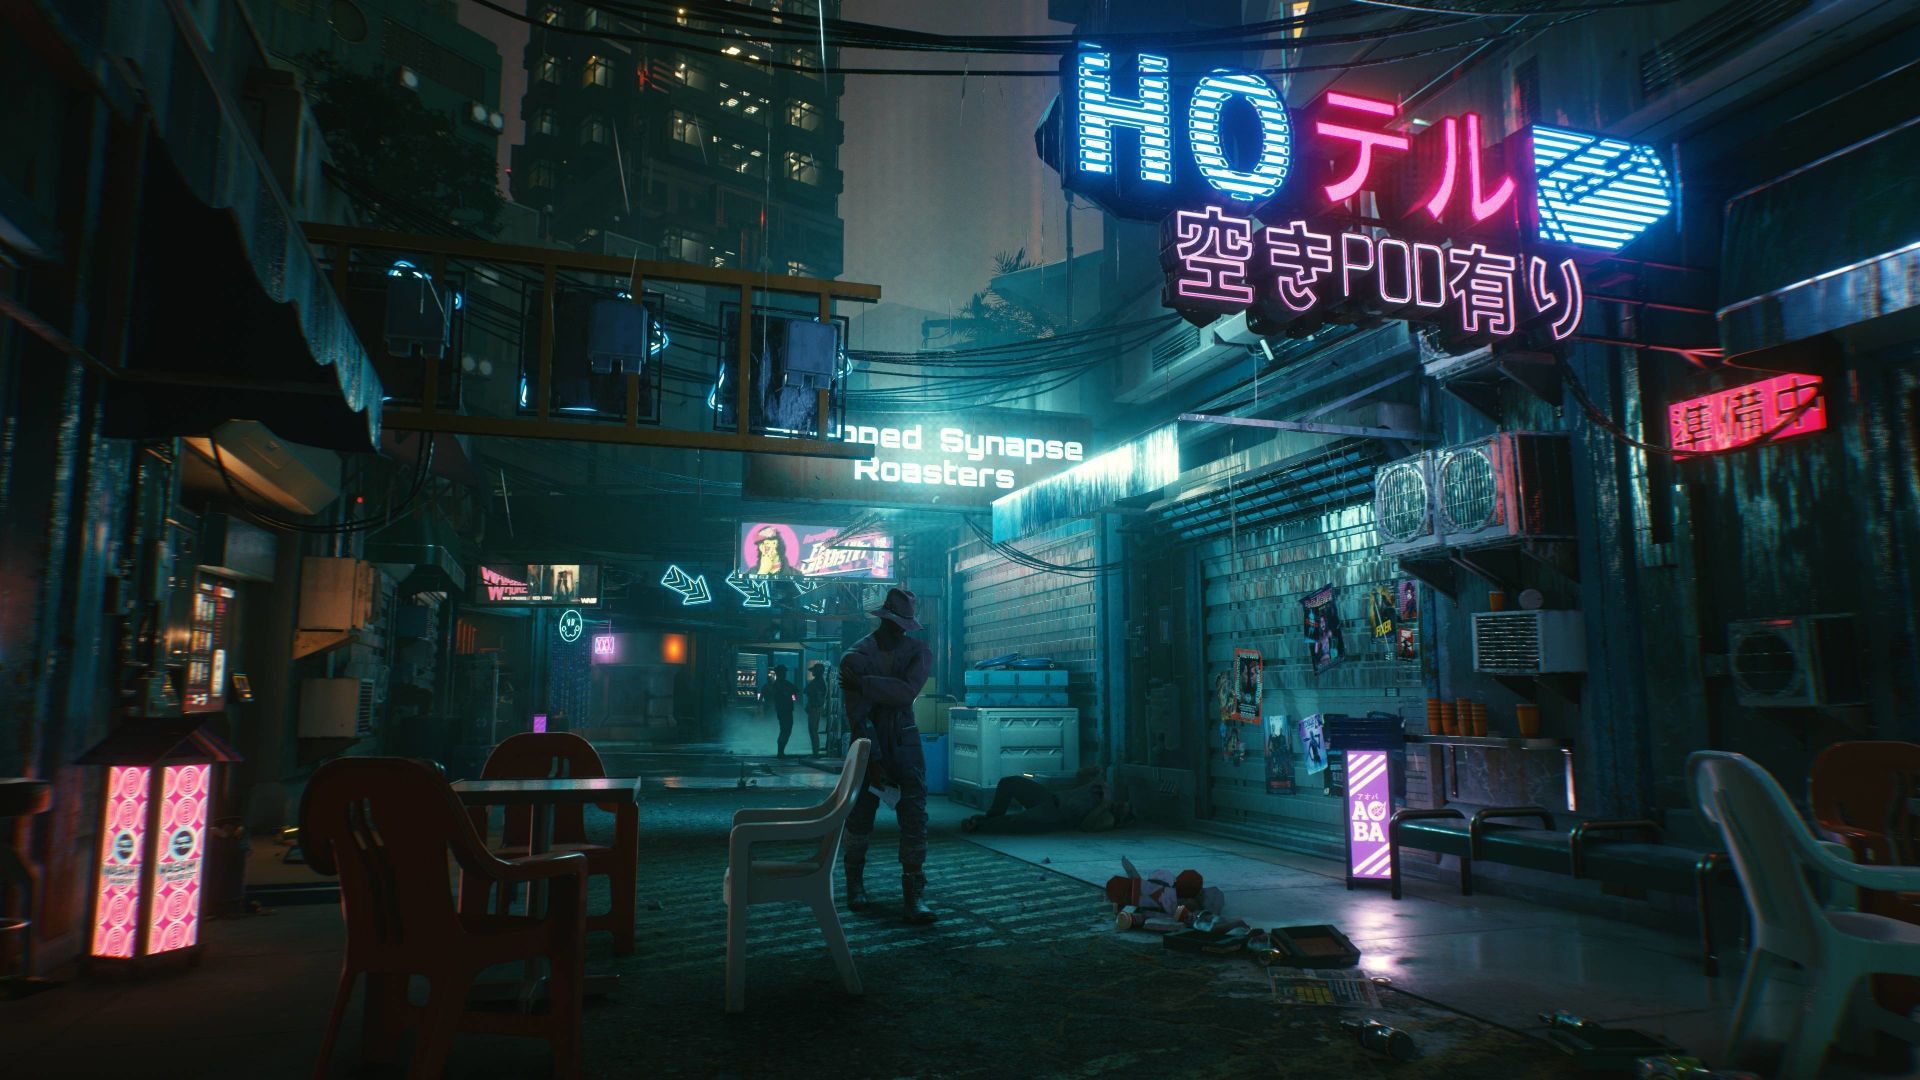 Desktop wallpaper night of city, video game, cyberpunk HD image, picture, background, bd7ff7